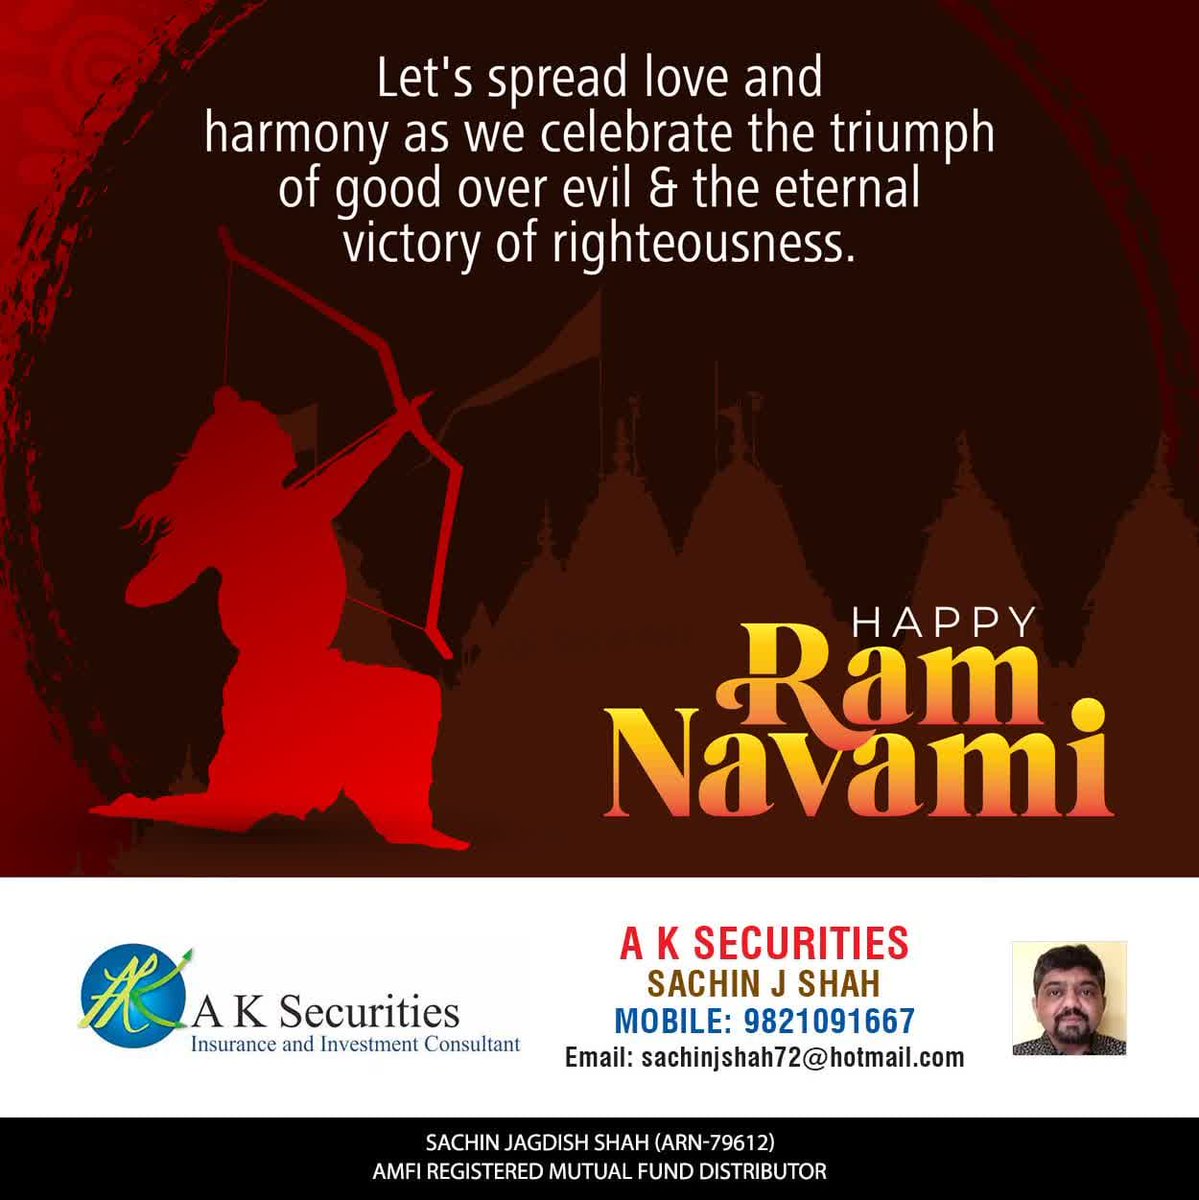 Wishing you all blessings filled with peace and joy on the birth anniversary of Lord Ram. Happy Ram Navami! 

Get in touch with us for all your financial needs.

#aksecurities #planahead #secureyourfuture   #personalinsurance #protectedforlife #RamNavami